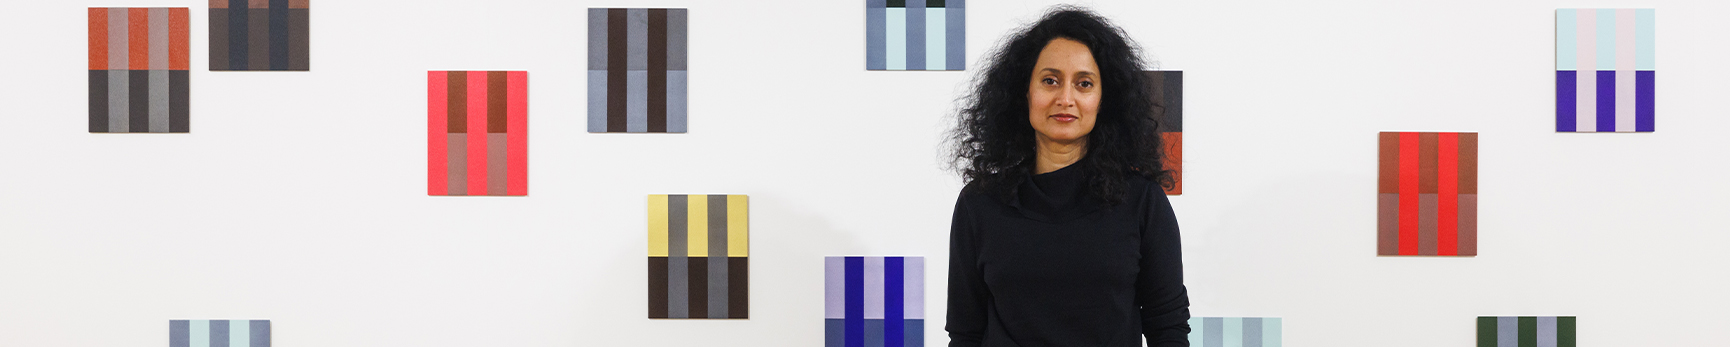 Rana stands in front of her 20 small rectangle geometric panel paintings against a white wall.